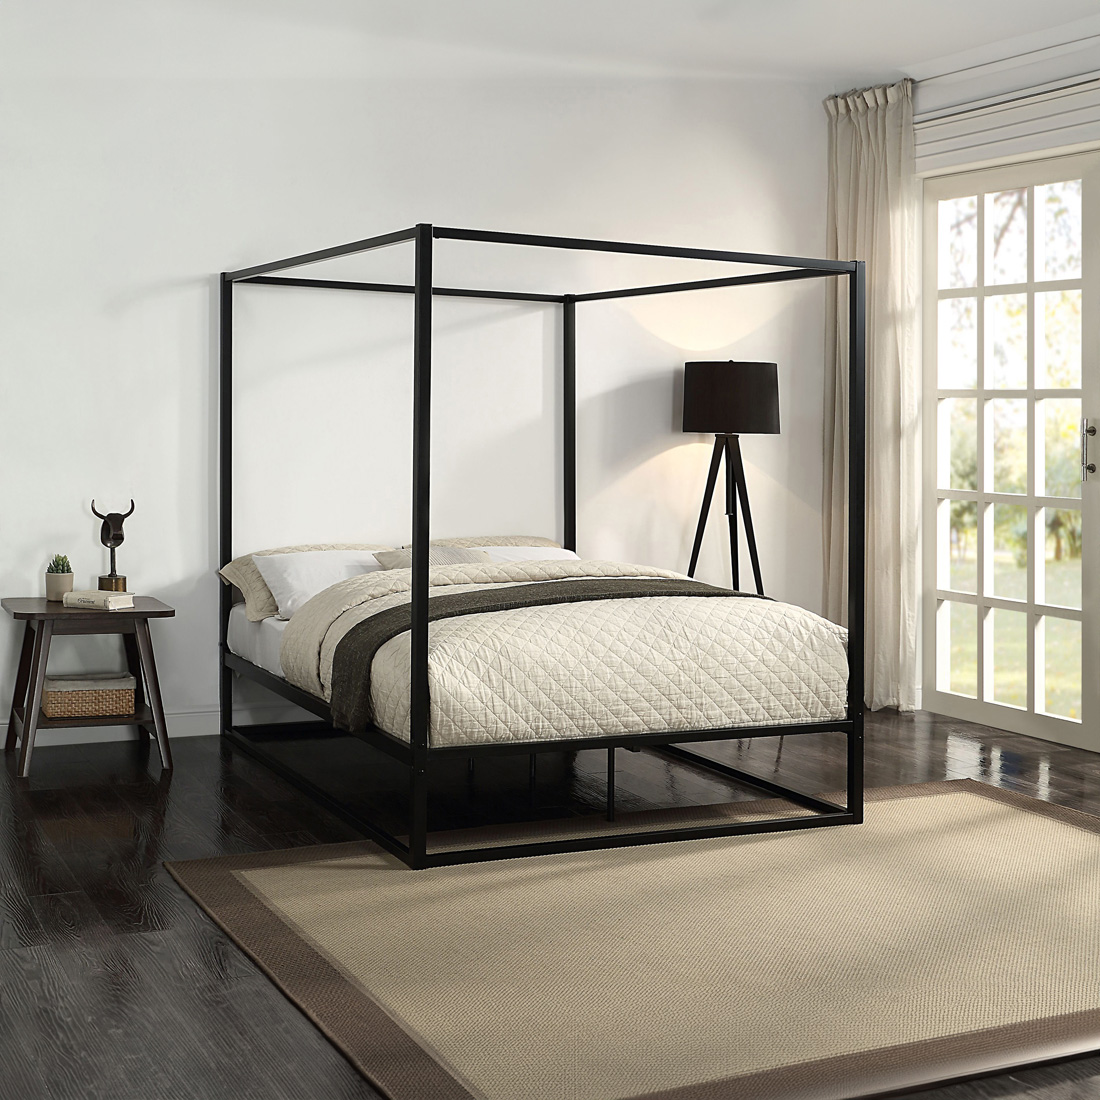 ASHWELL 4 POSTER METAL BED FRAME BLACK/WHITE - SINGLE/SMALL DOUBLE ...